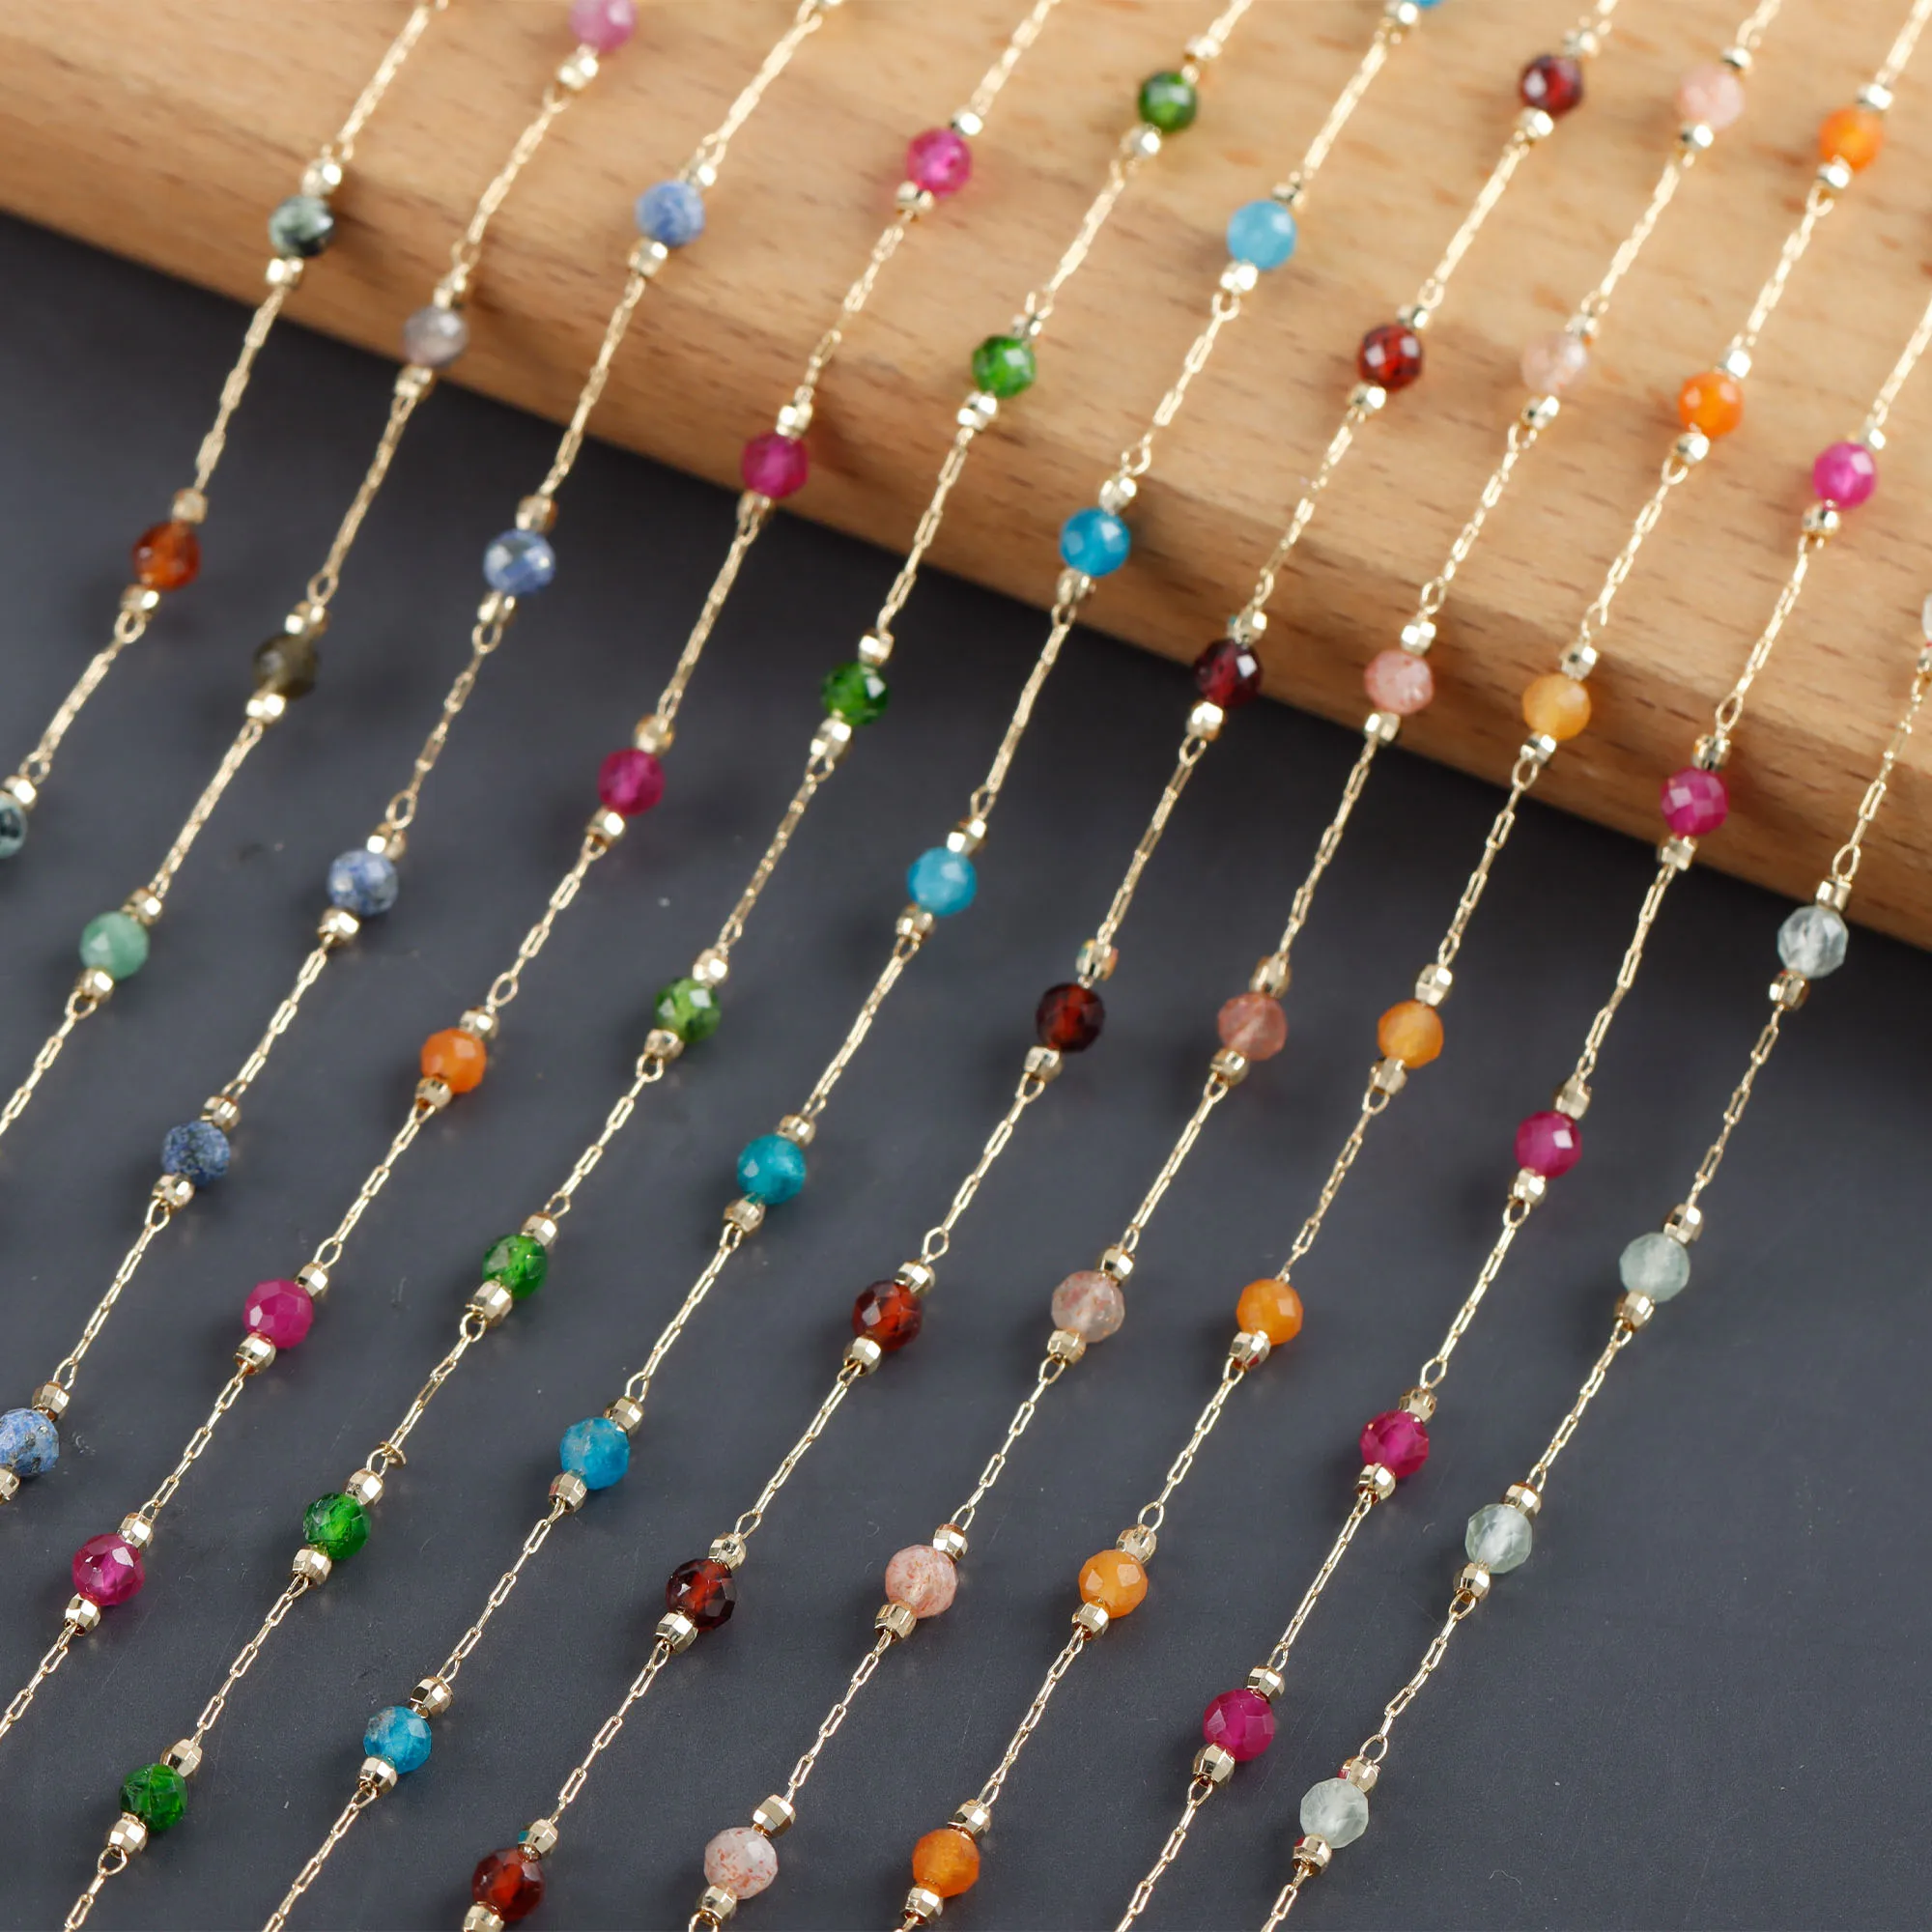 

Colorful Natural Stone Metal Chain Diy Necklace Bracelet For Women Jewelry Making C220, Picture shown